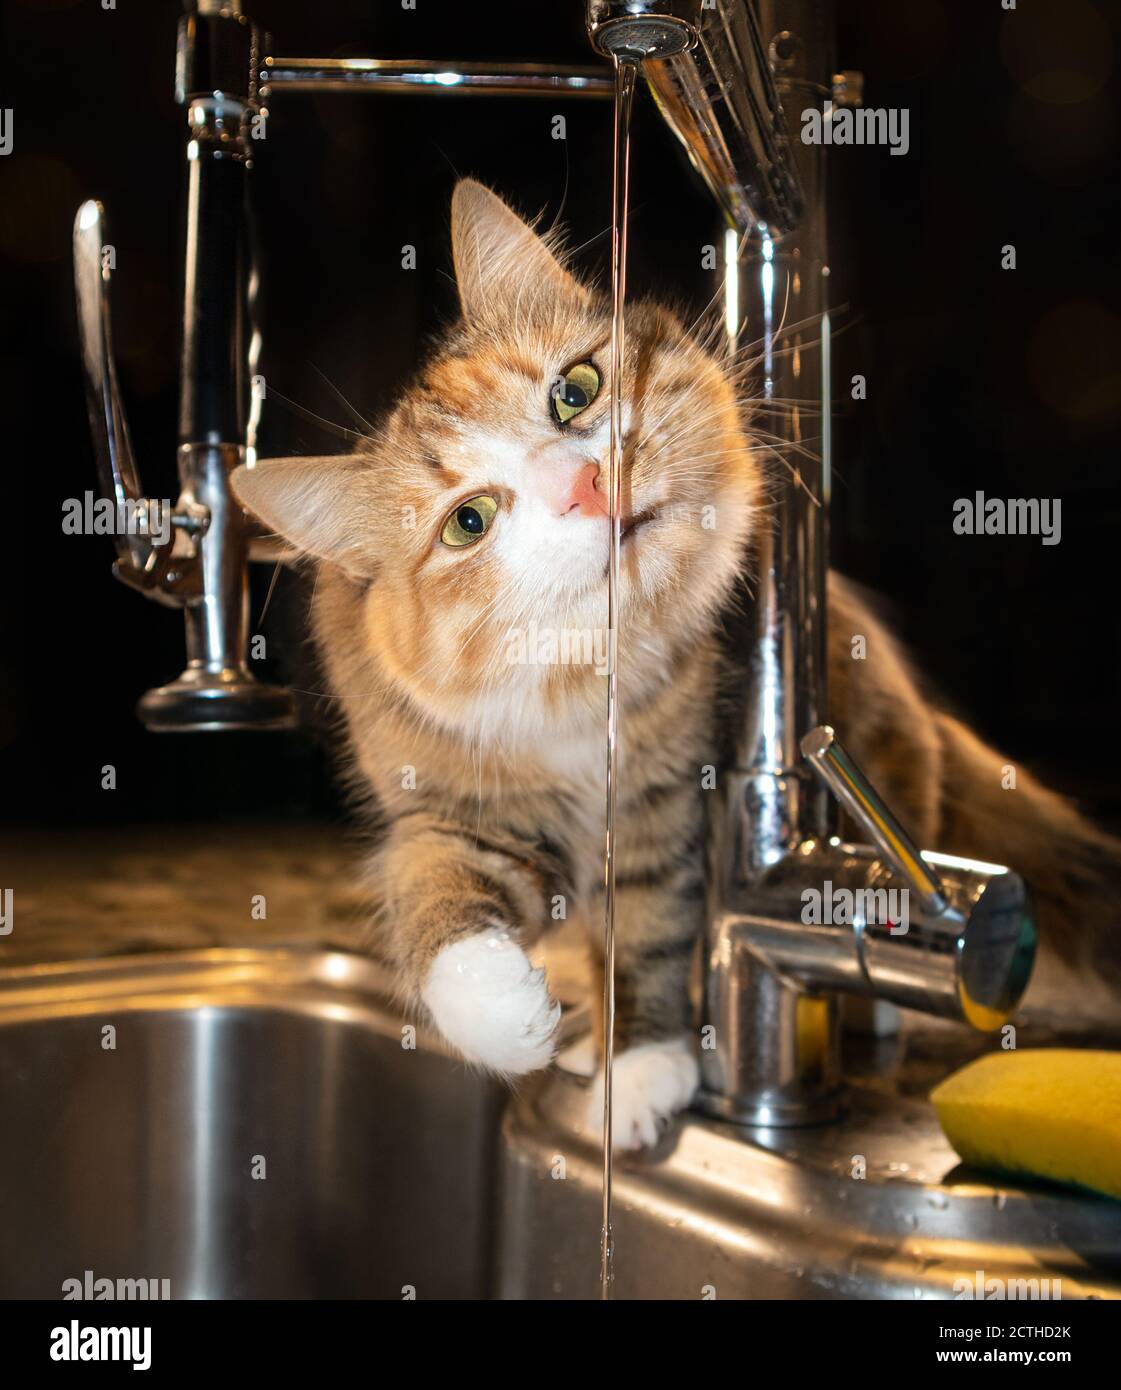 Cute cat with running water from kitchen tap or faucet. Focus on cat head. Fluffy calico or torbie feline sitting on kitchen counter. Stock Photo